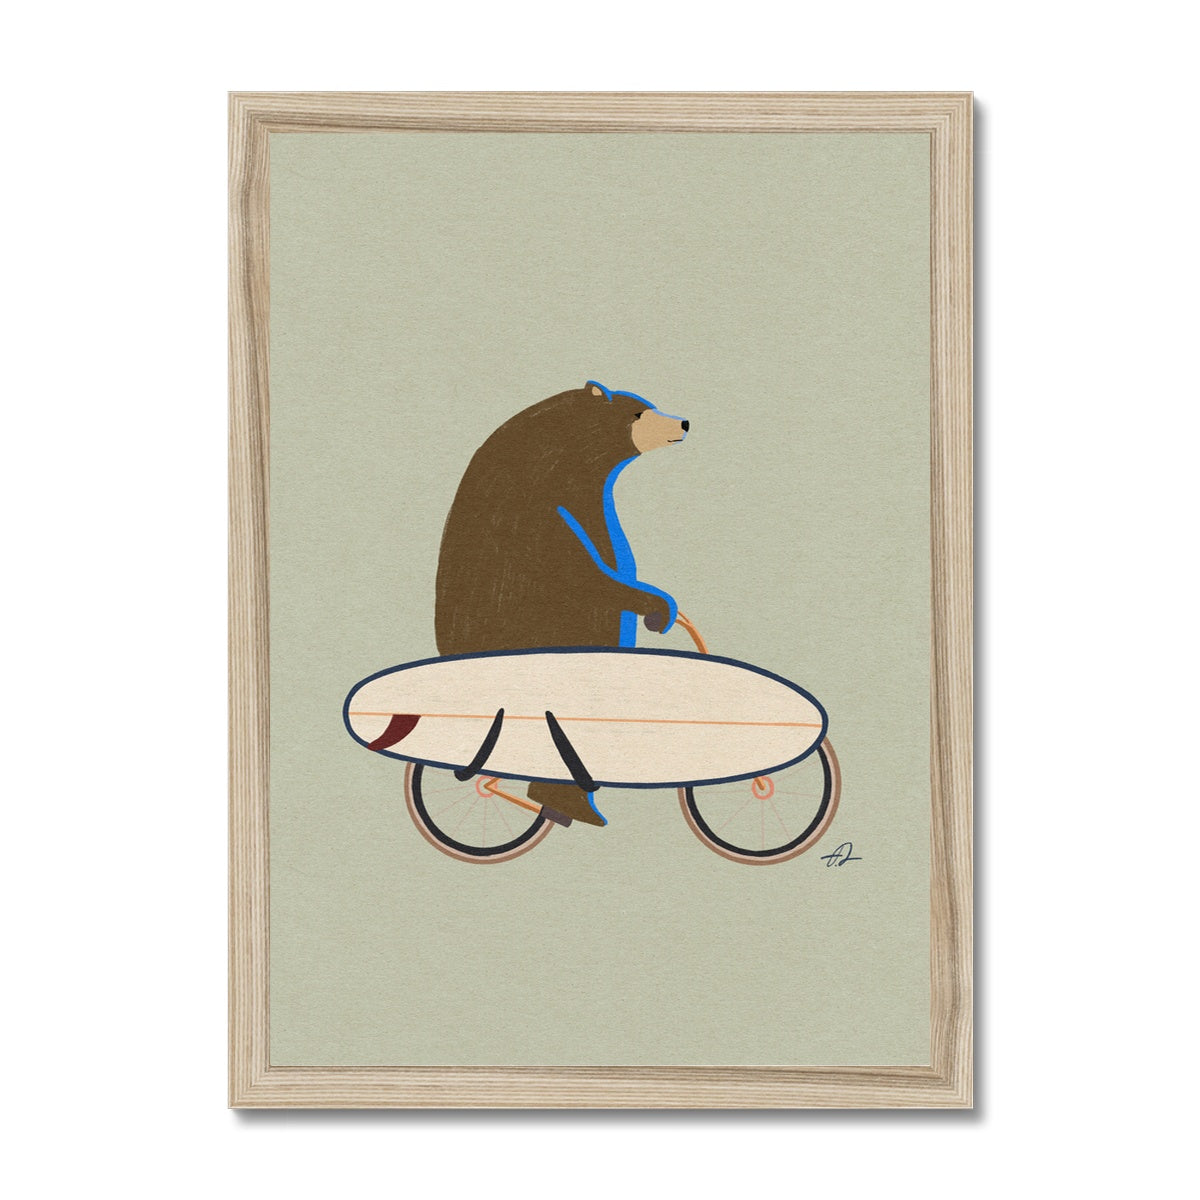 Grizzly riding a bike with a surfboard Framed Print